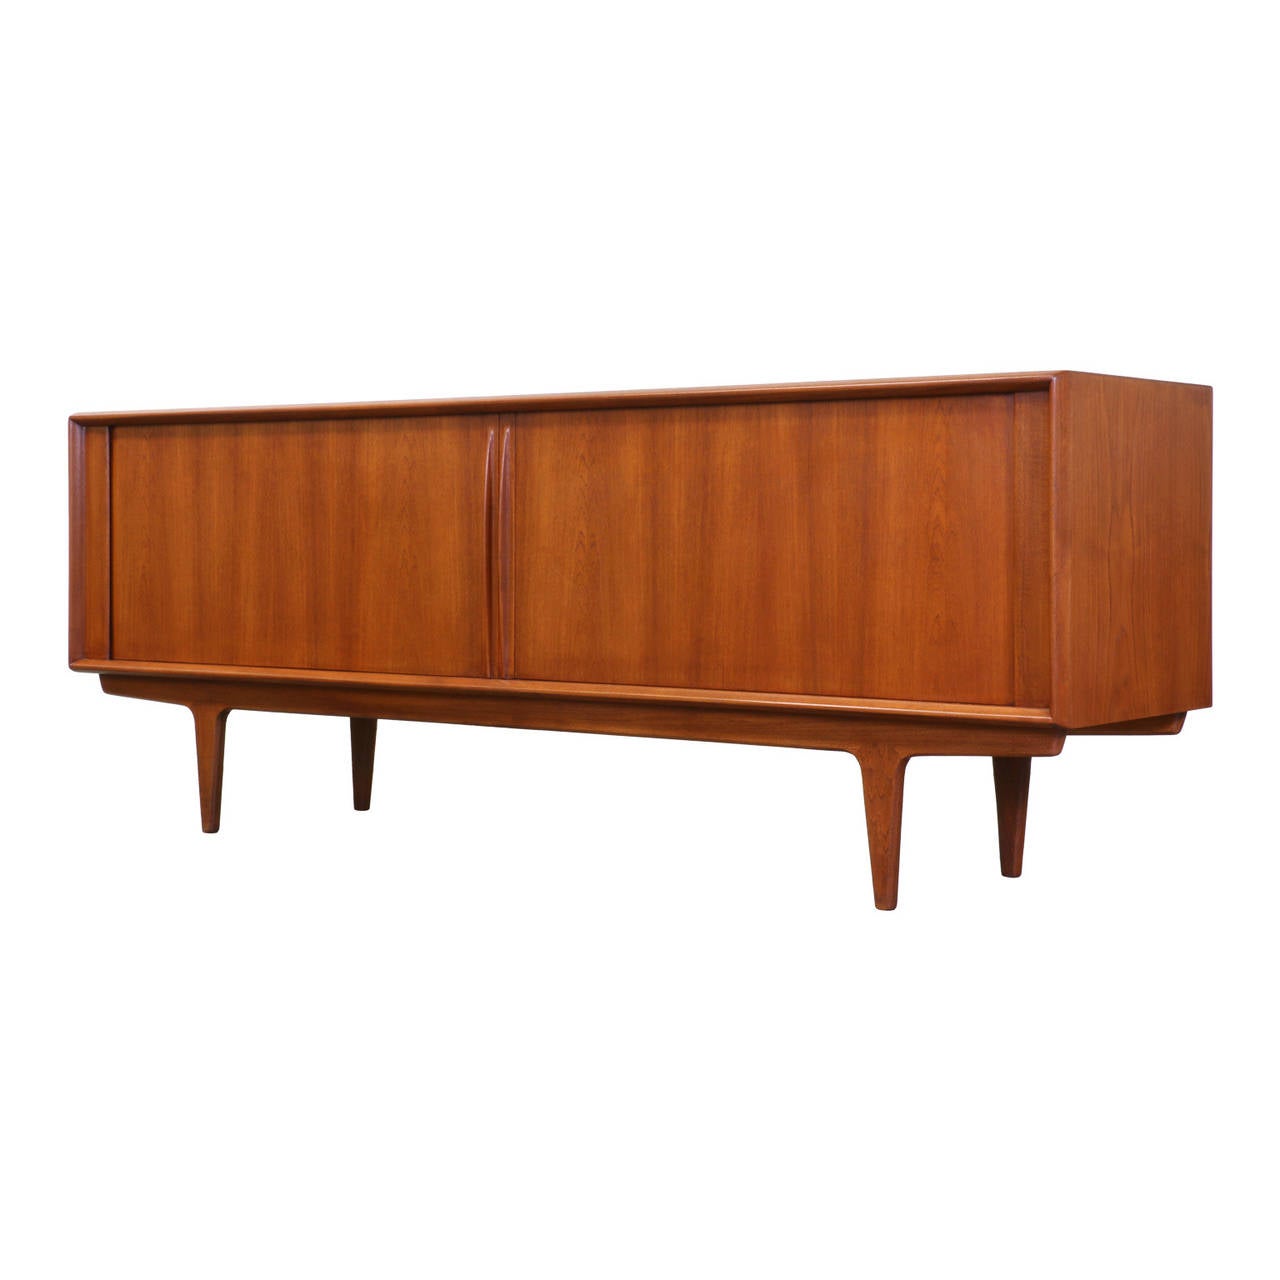 Designer: Bernhard Pedersen and Son.
Manufacturer: Bernhard Pedersen and Son.
Period/Style: Danish Modern.
Country: Denmark.
Date: 1960s.

Dimensions: 31″ H x 83″ L x 20.5″ W.
Materials: Teak.
Condition: Excellent newly refinished.
Number